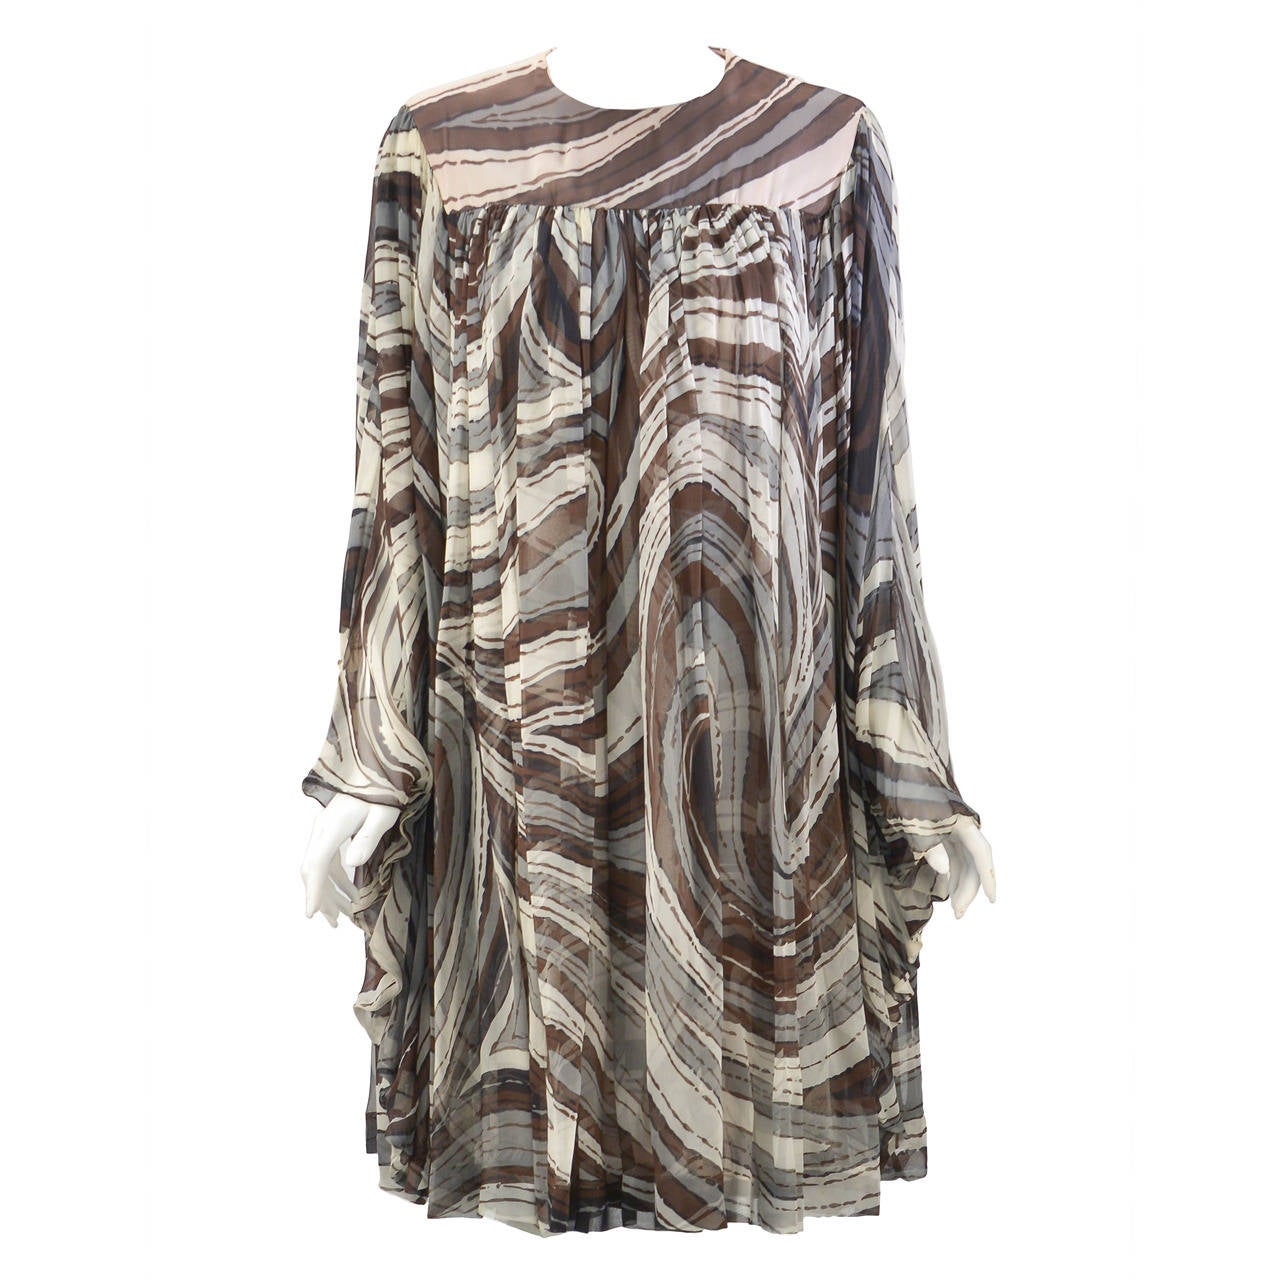 This 1960's Donald Brooks multi brown silk dress with its dramatic batwing sleeves will be all the rave at any event/outing. It looks perfect on every body type. The dress is loose-fitting with gathers in front and back that billow perfectly at the